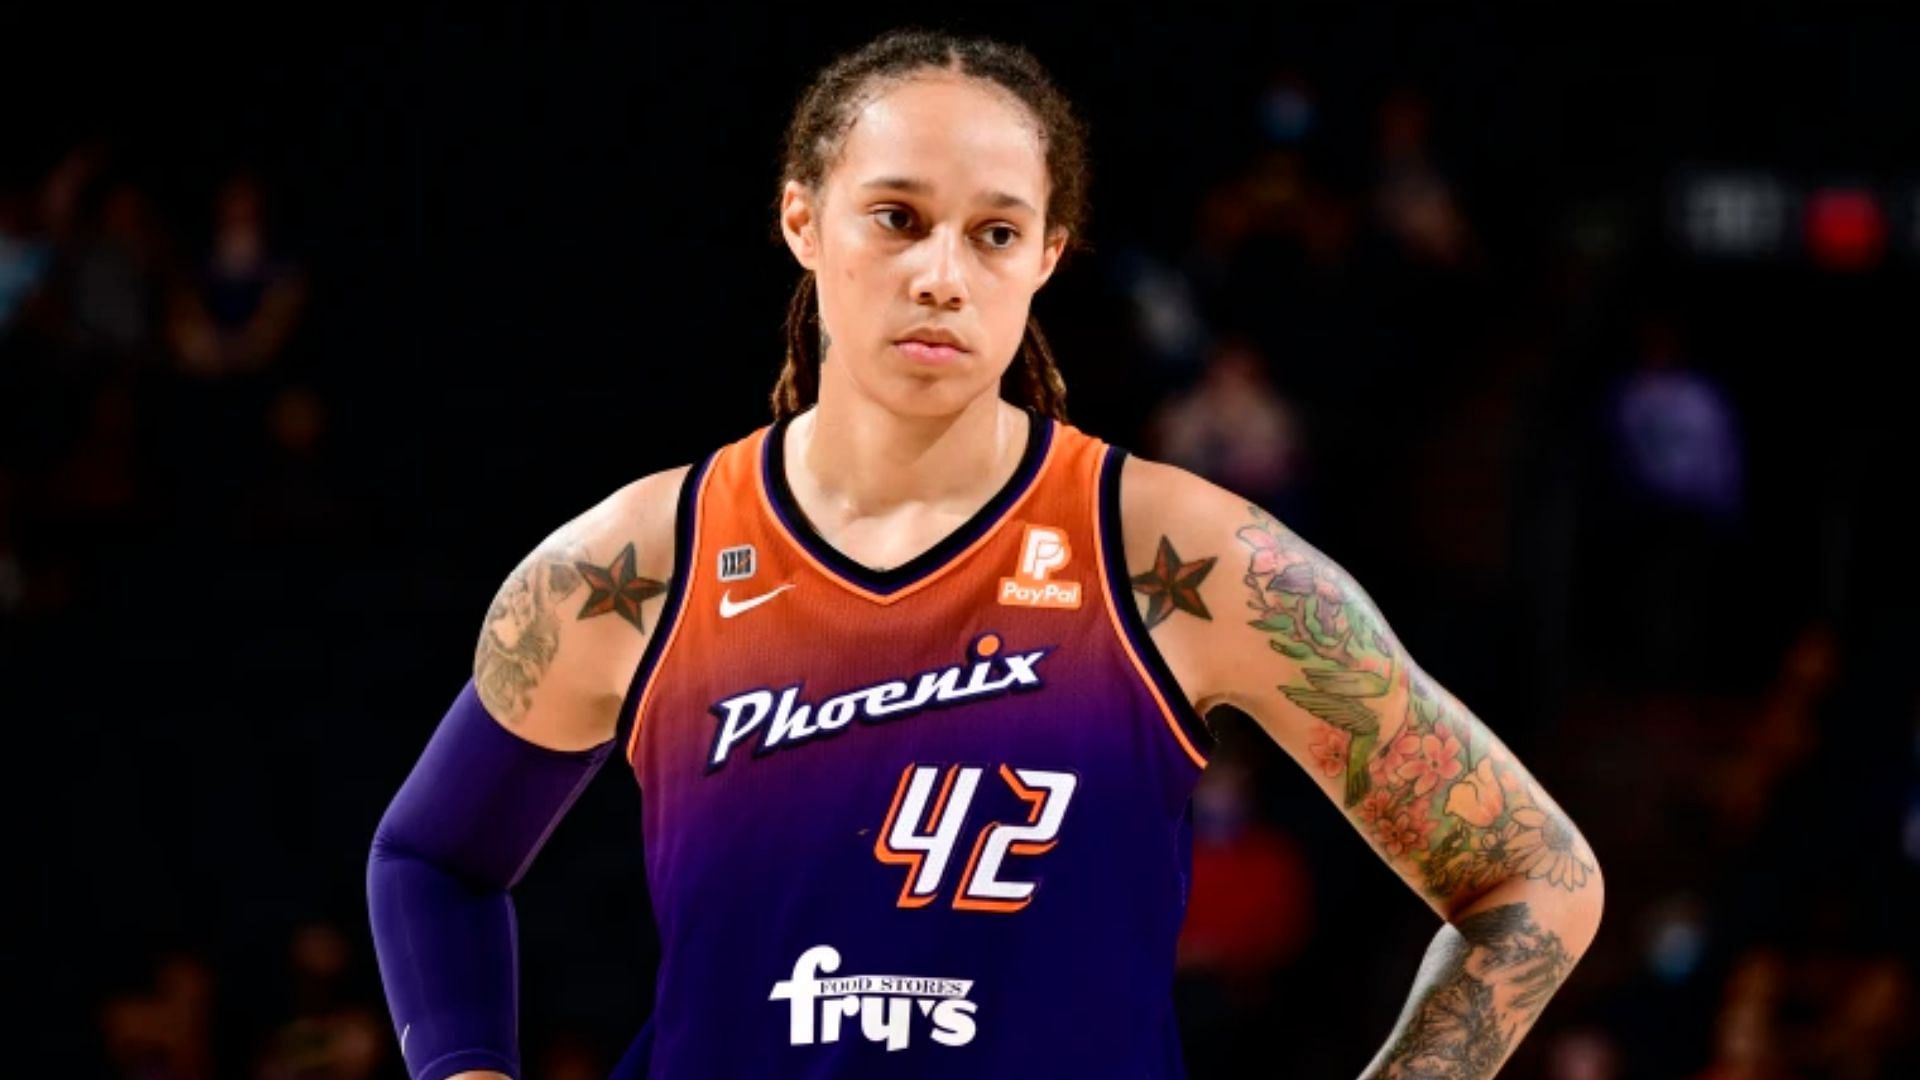 Brittney Griner has been held in Russia since February (Image via Getty Images/Barry Gossage)